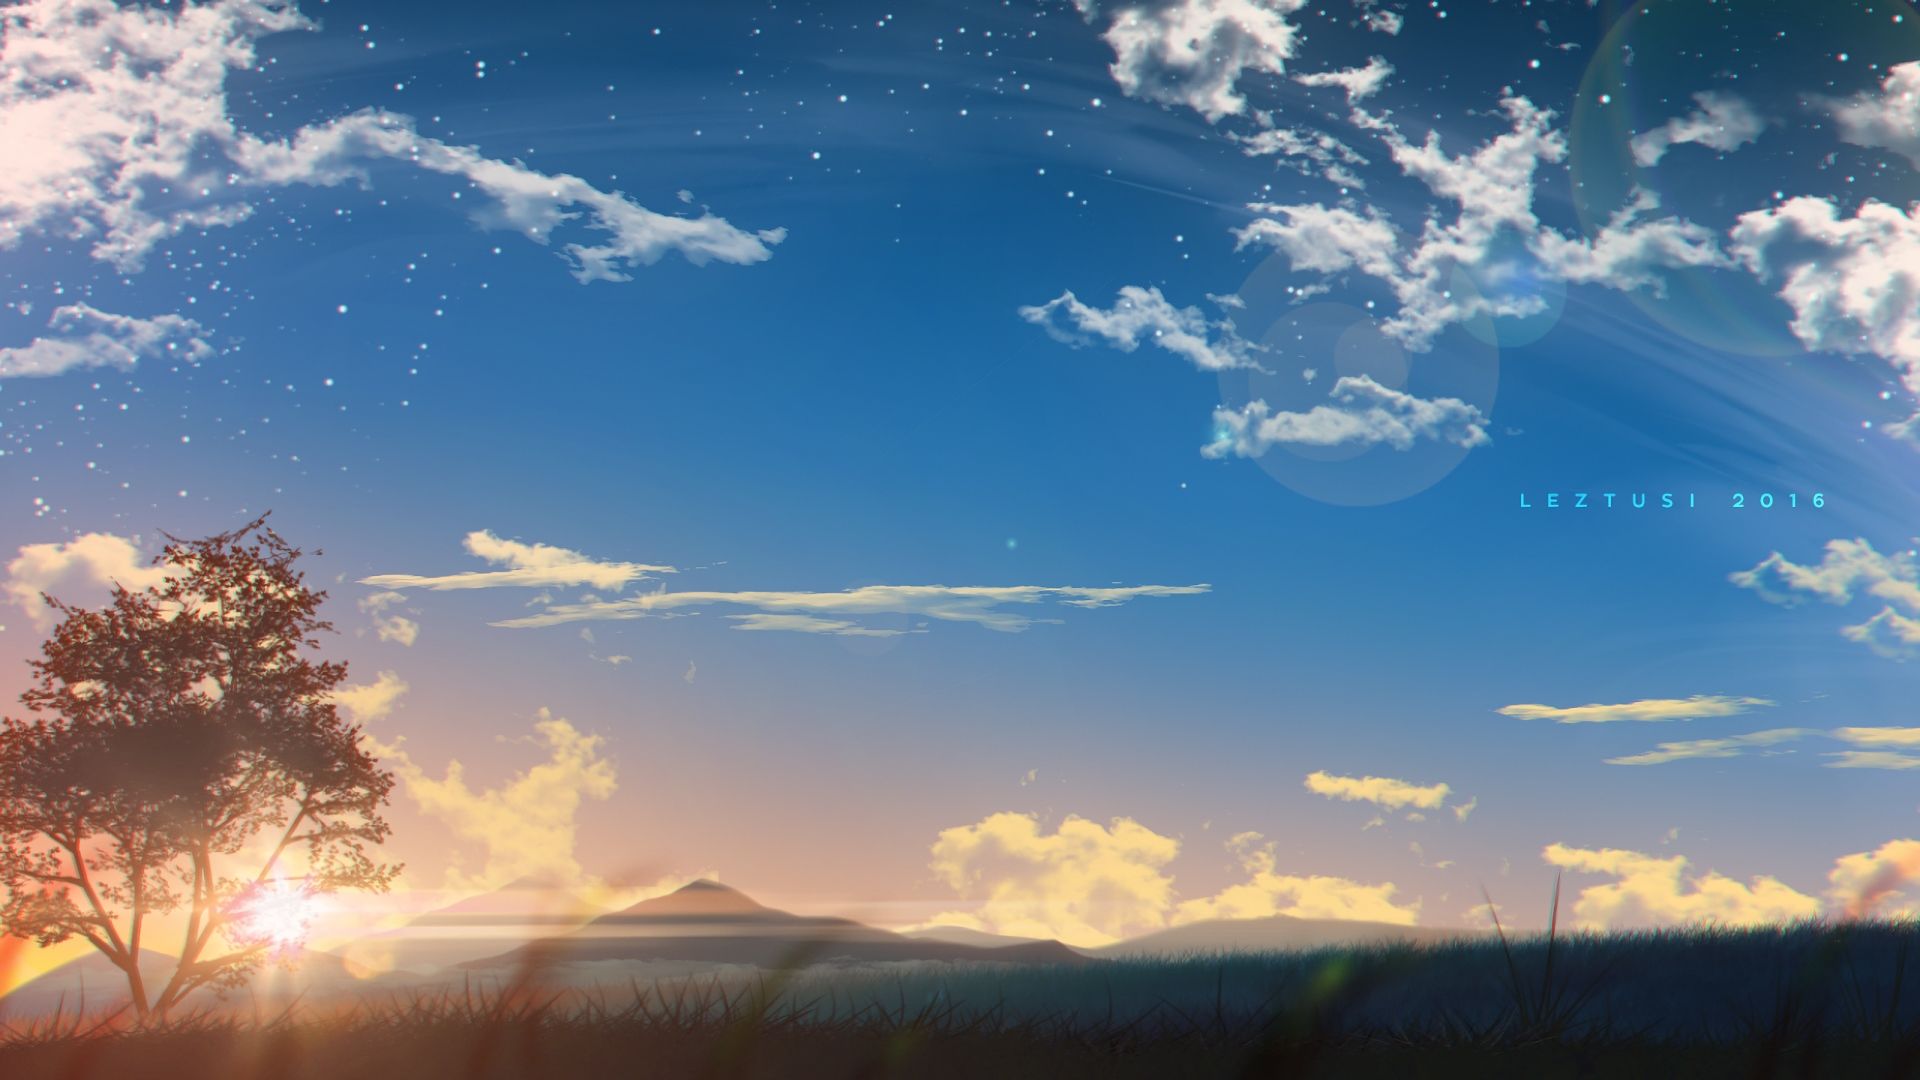 Your Name Wallpaper 1920x1080